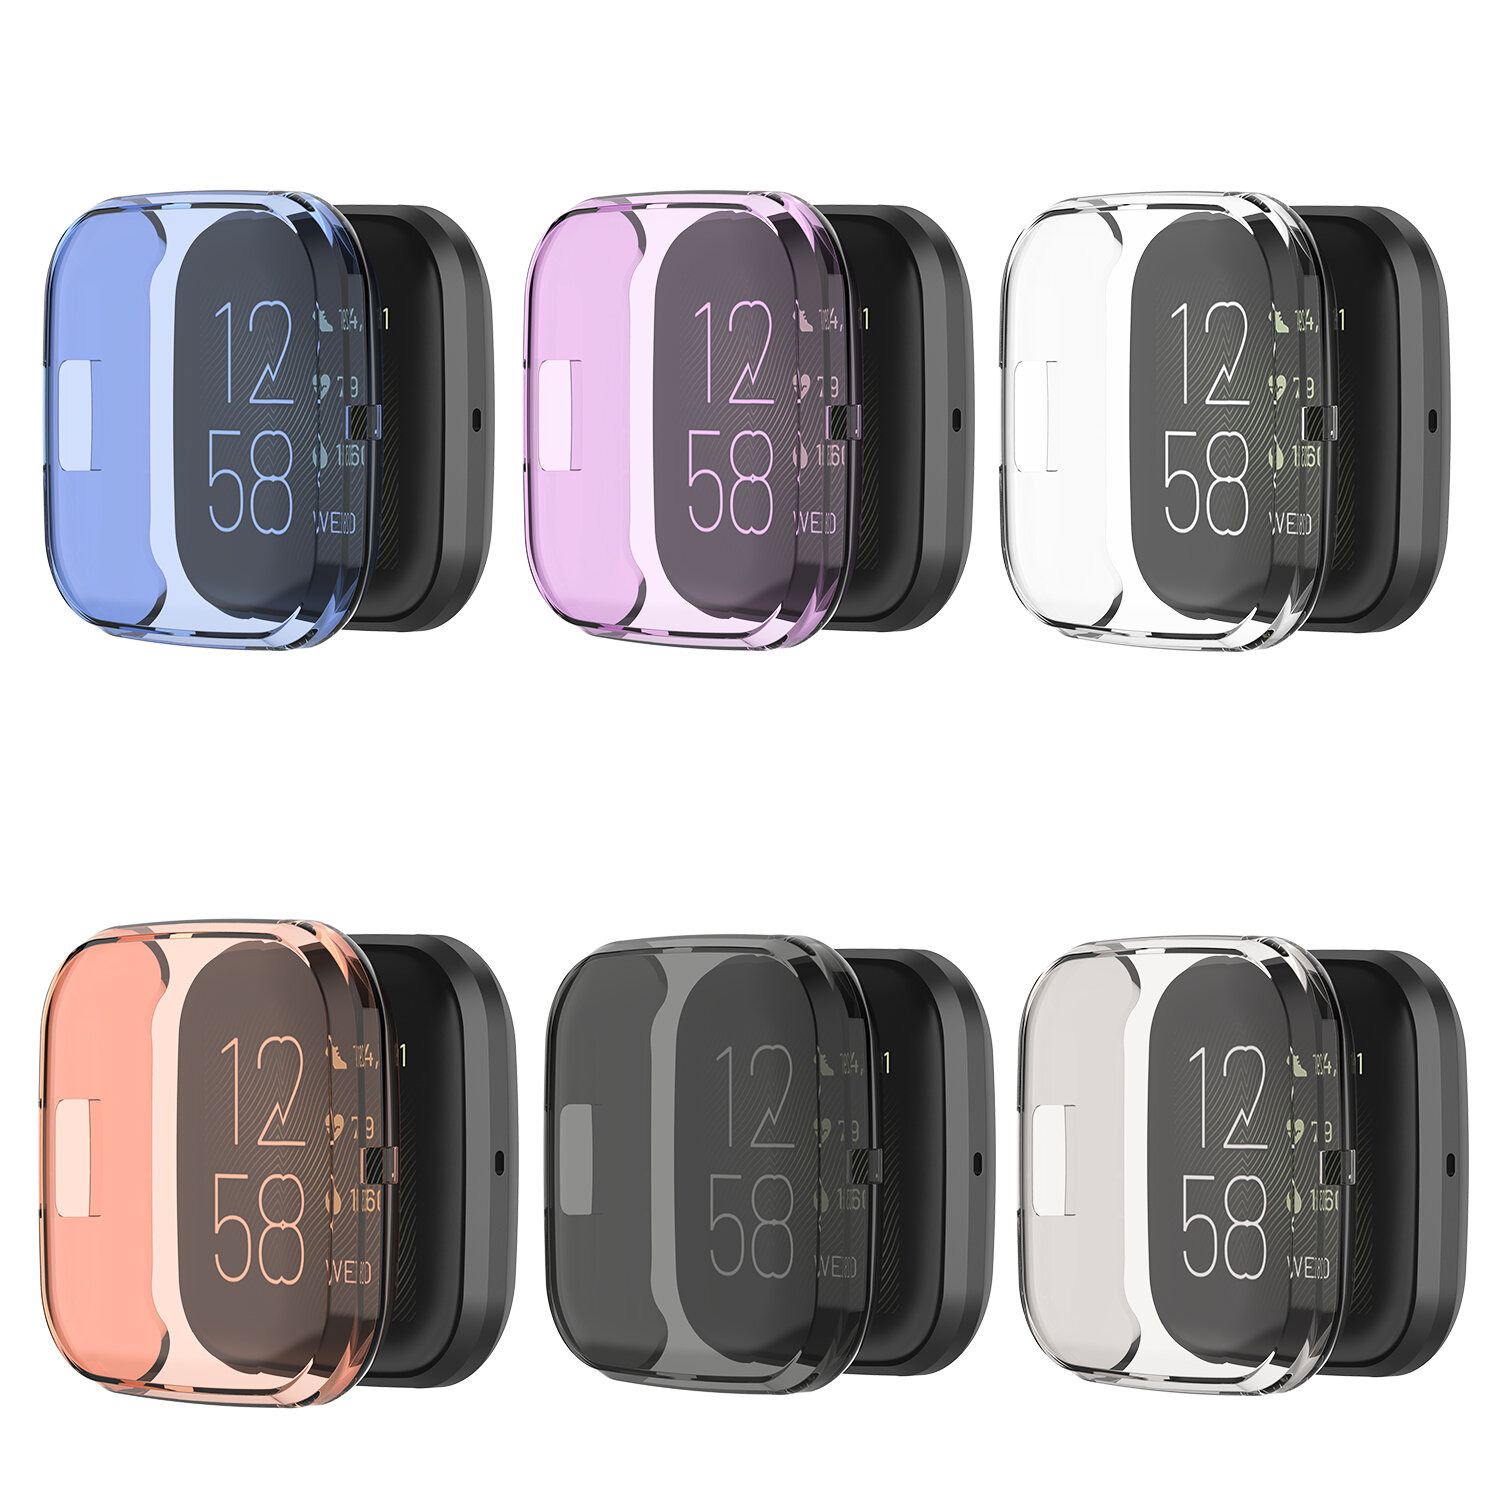 

Bakeey Multi-color Transparent Soft TPU Rubber All-inclusive Watch Protector Case Cover For Fitbit Versa 2